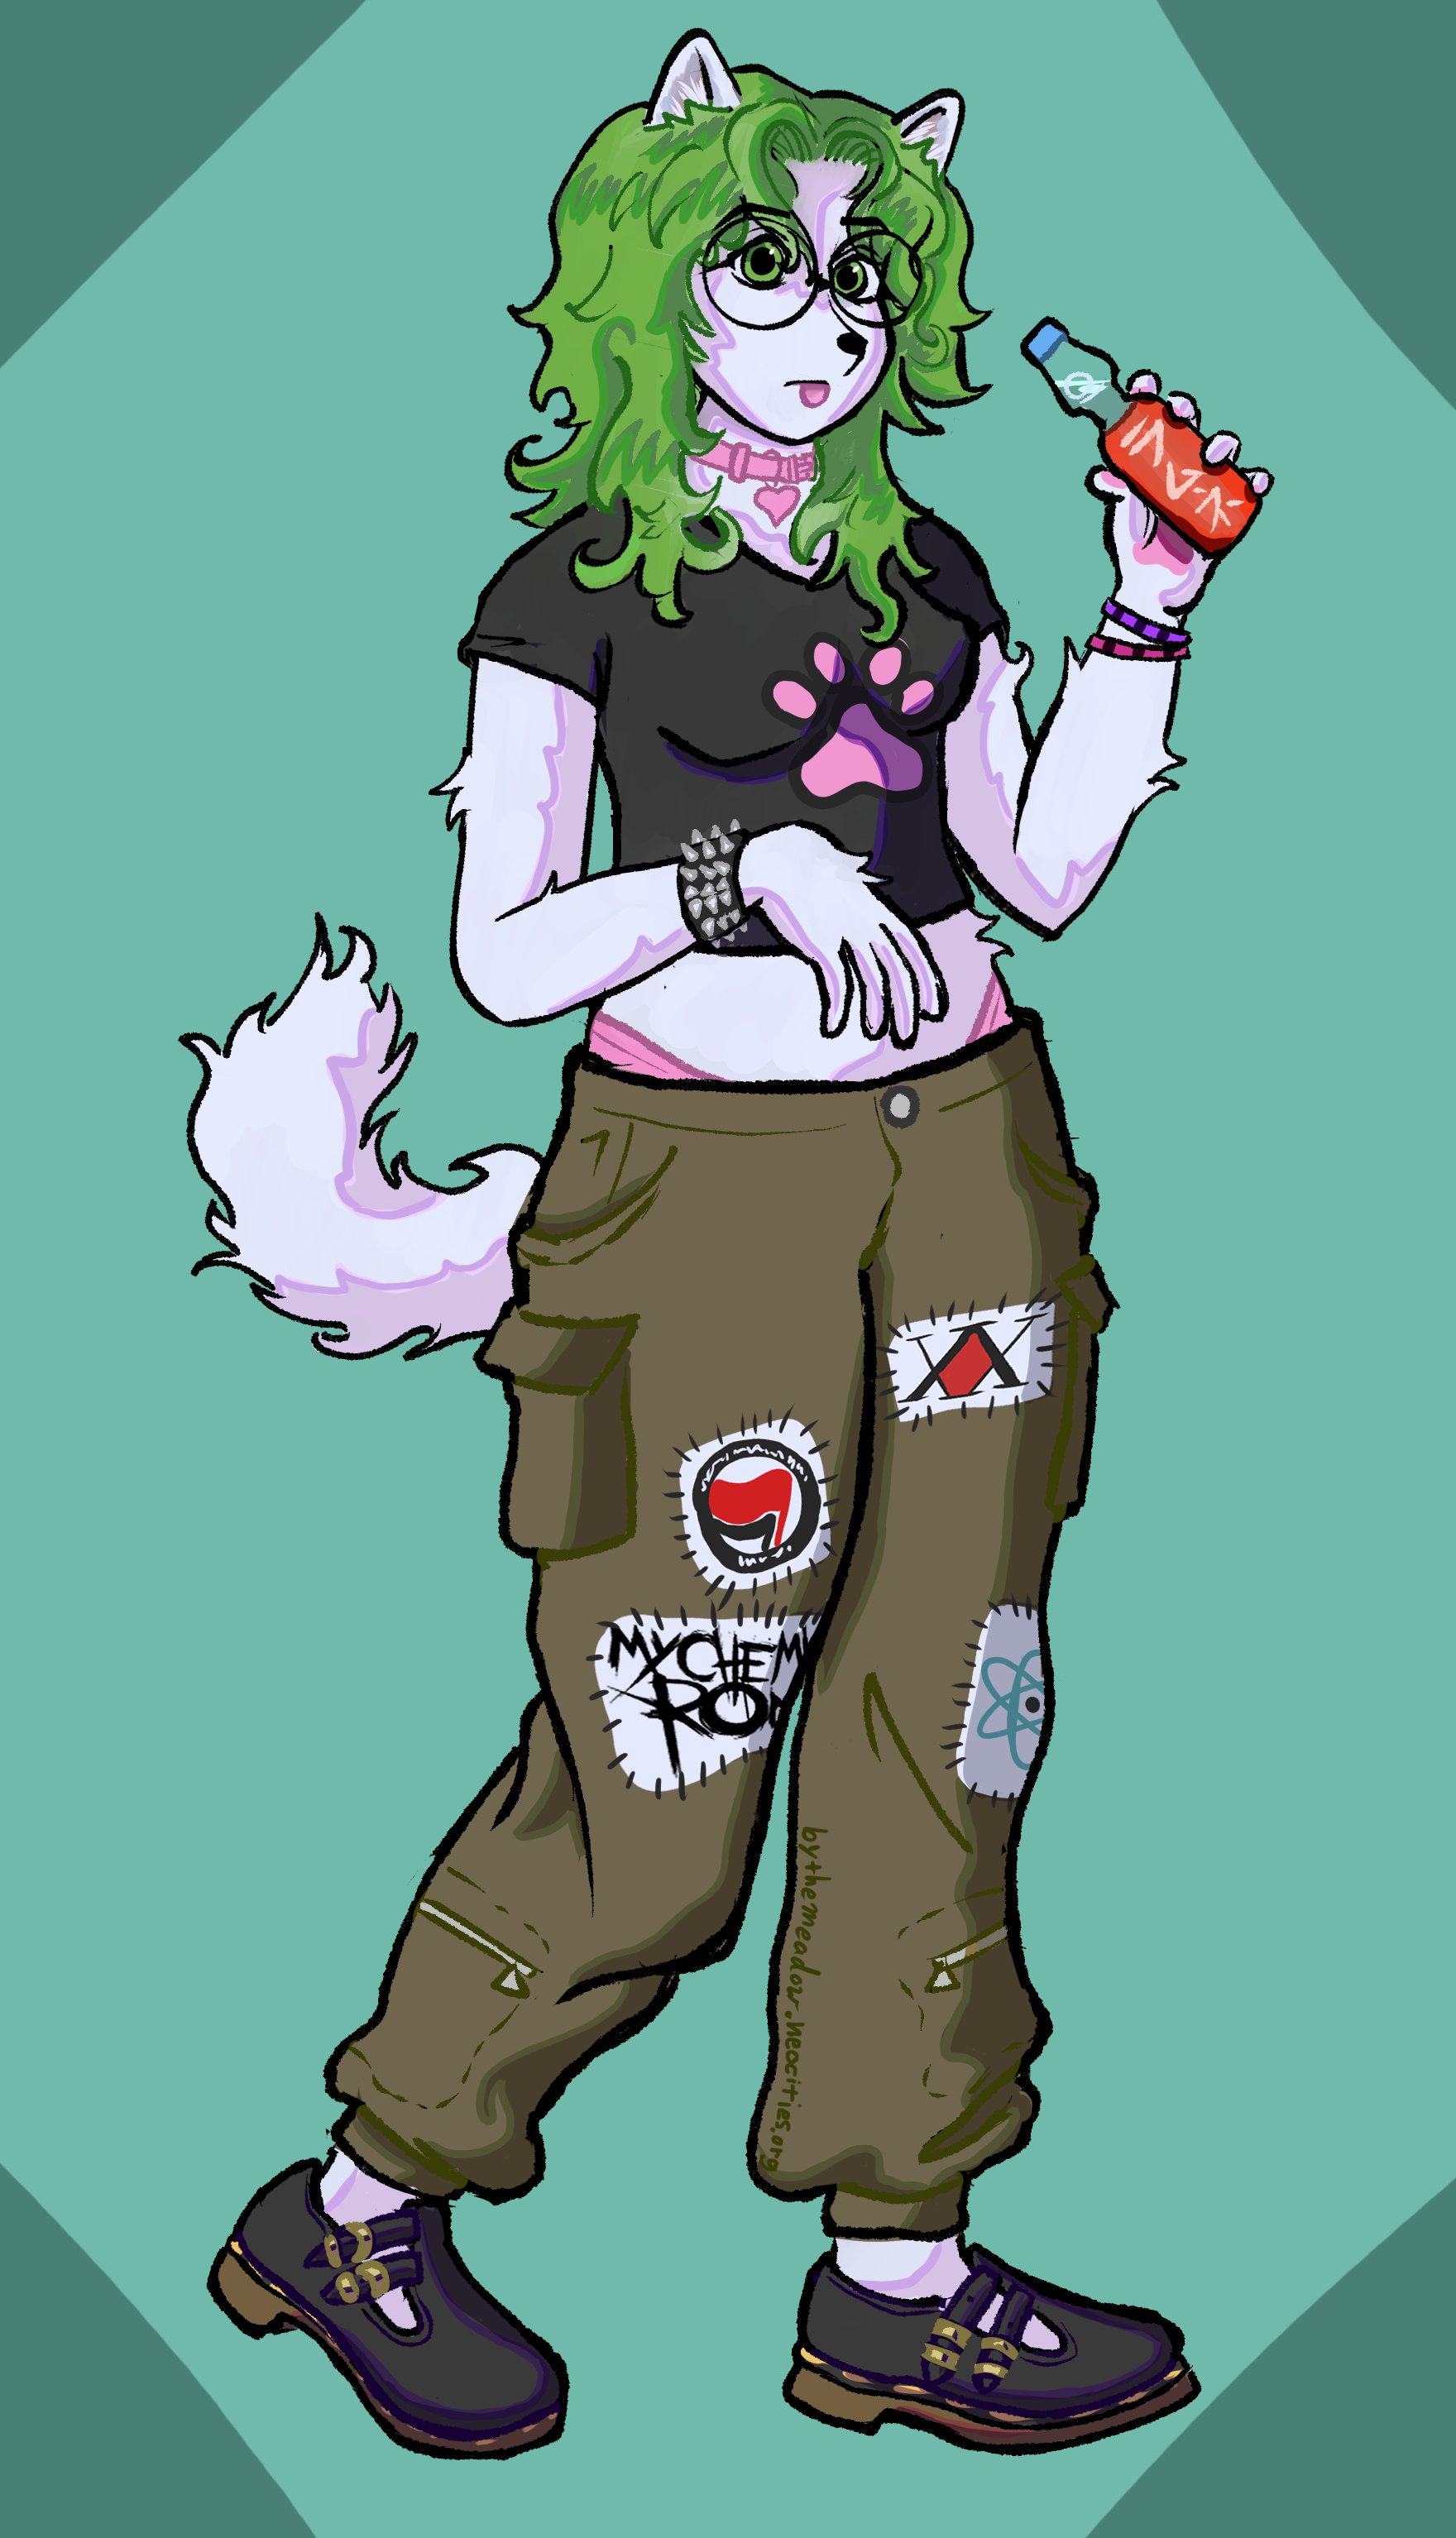 A colored digital drawing of the webmaster's fursona. She is a white samoyed with long green hair and circle glasses. She's wearing a pink dog collar, a black cutoff tshirt with a pink paw on it, and a pair of green cargo pants with various patches on them. The patches are: the Hunter x Hunter logo, the My Chemical Romance Logo, the antifa symbol, and a symbol worn by Jade Harley. She is also holding a bottle of ramune, and is looking blankly at the camera with her tongue out.